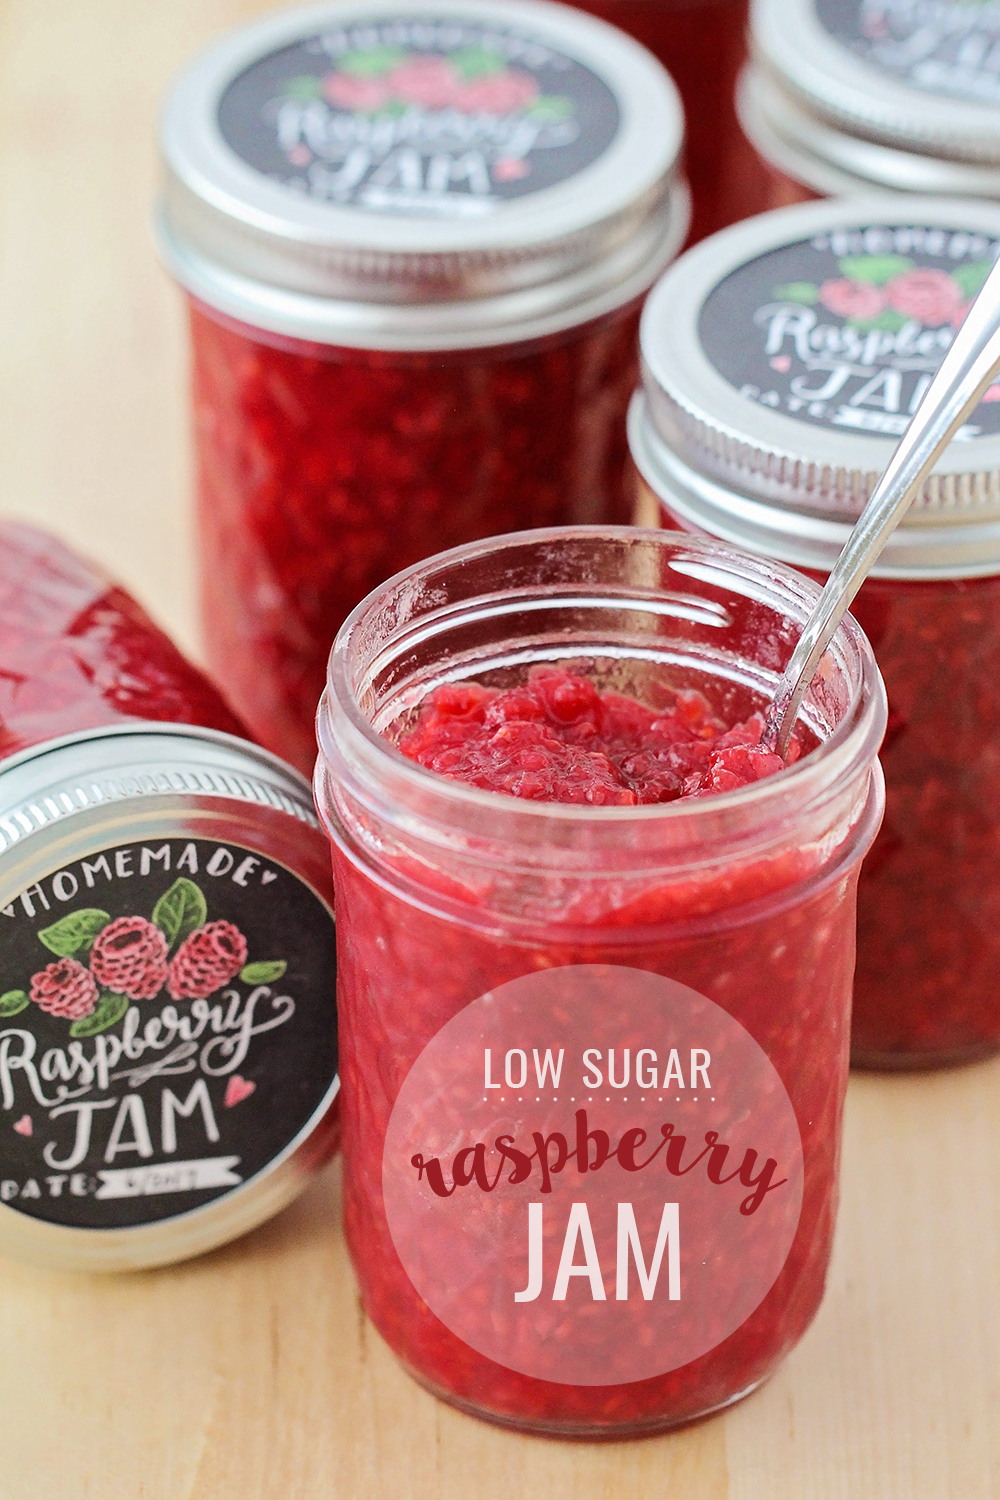 This low sugar fresh raspberry jam has way less sugar than regular jam, but is just as delicious. It's so easy to make, too!